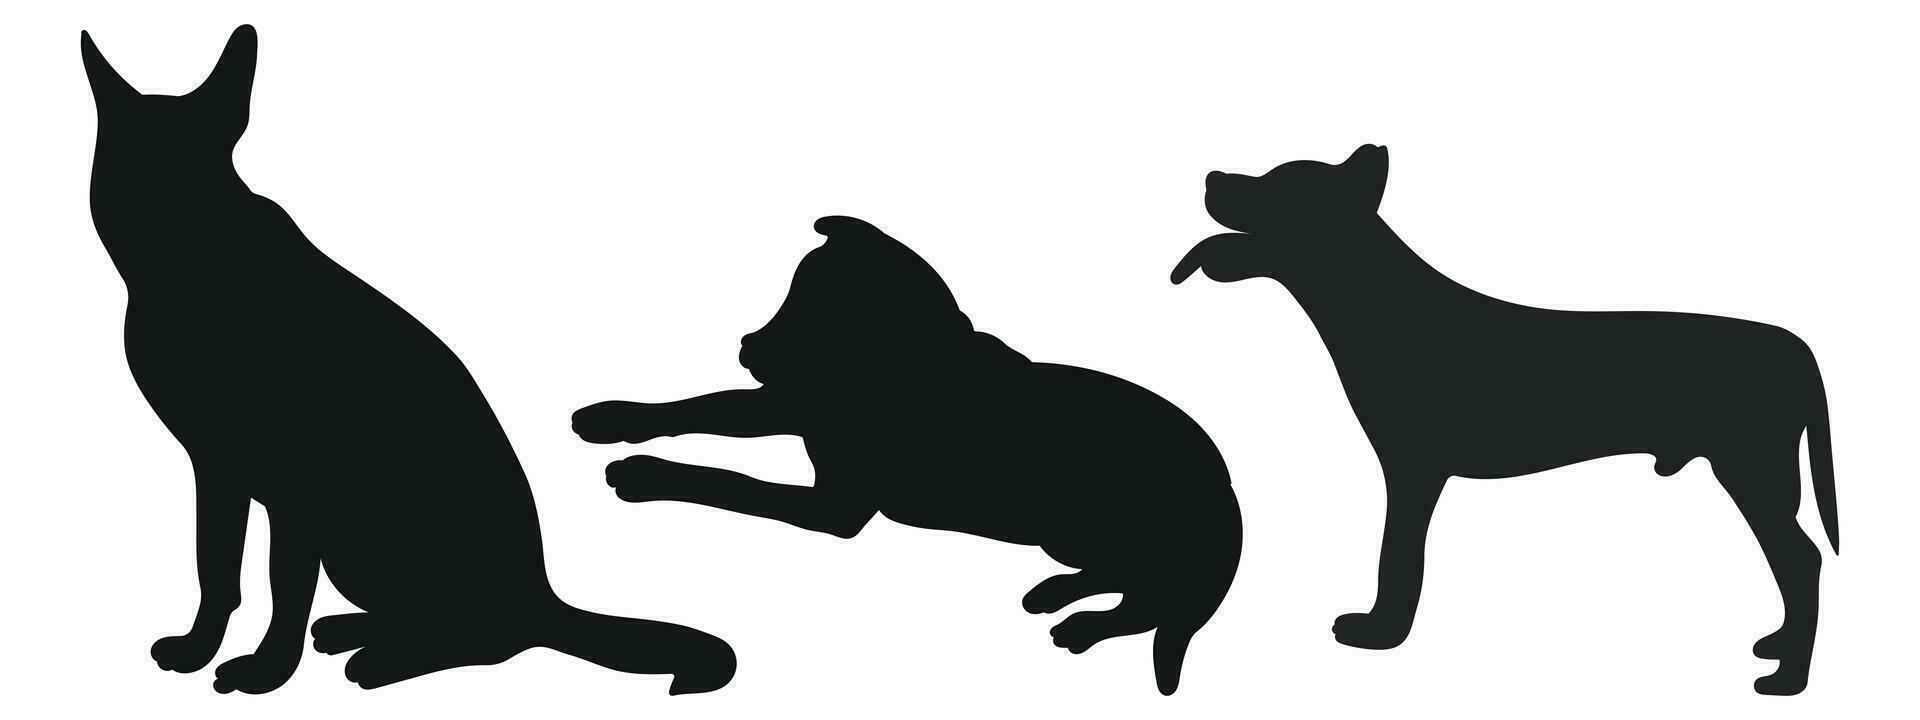 Sketch image of black silhouette dogs, outline of pets. Go, standing, sitting, lying, lie, running, jumping, training, walking, guarding, posing, play, showing vector